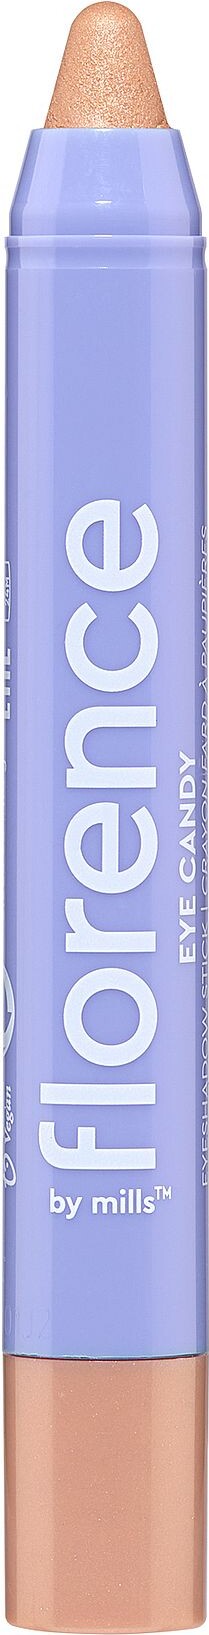 Florence By Mills - Eye Candy Eyeshadow Stick - Sugarcoat